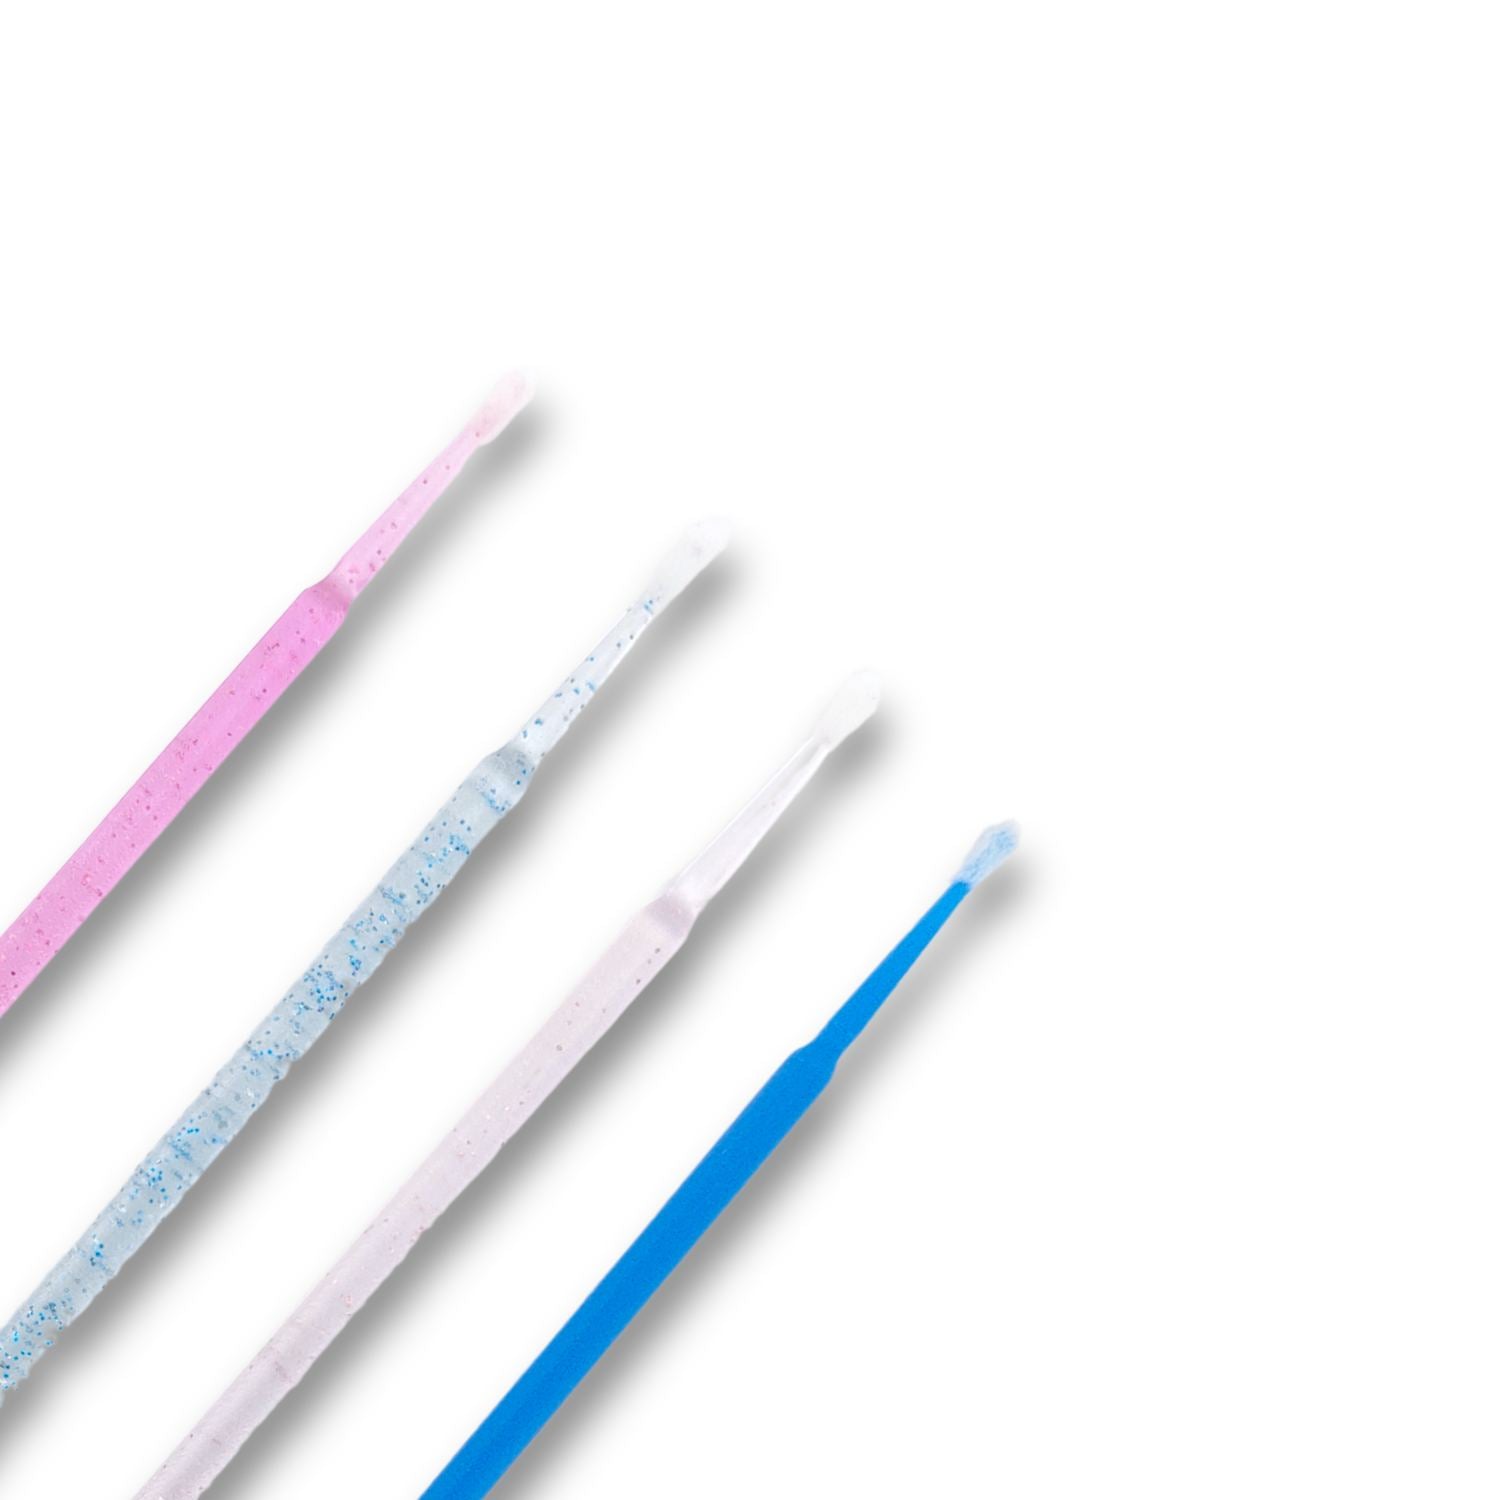 Disposable Micro Brushes for Eyelash Extensions - My Lash Store